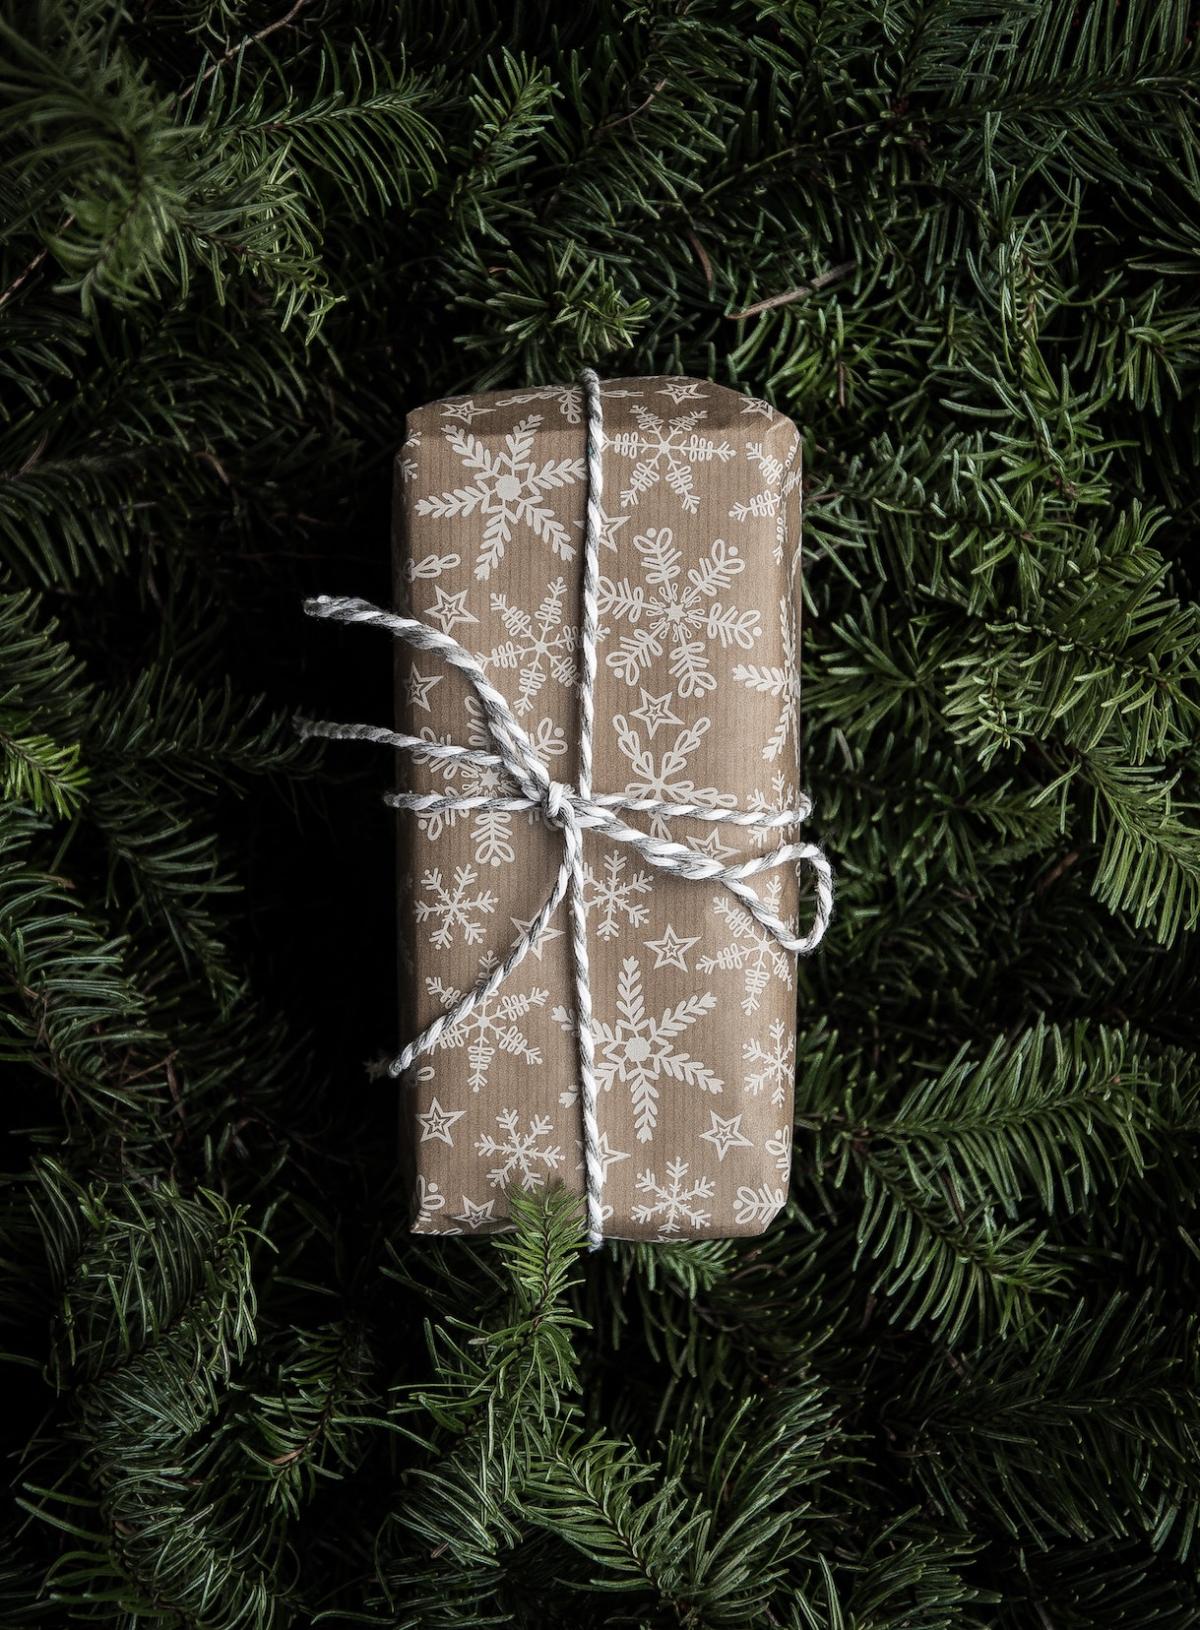 Read That's a Wrap: Our Favorite Sustainable Gifts for the Holiday Season